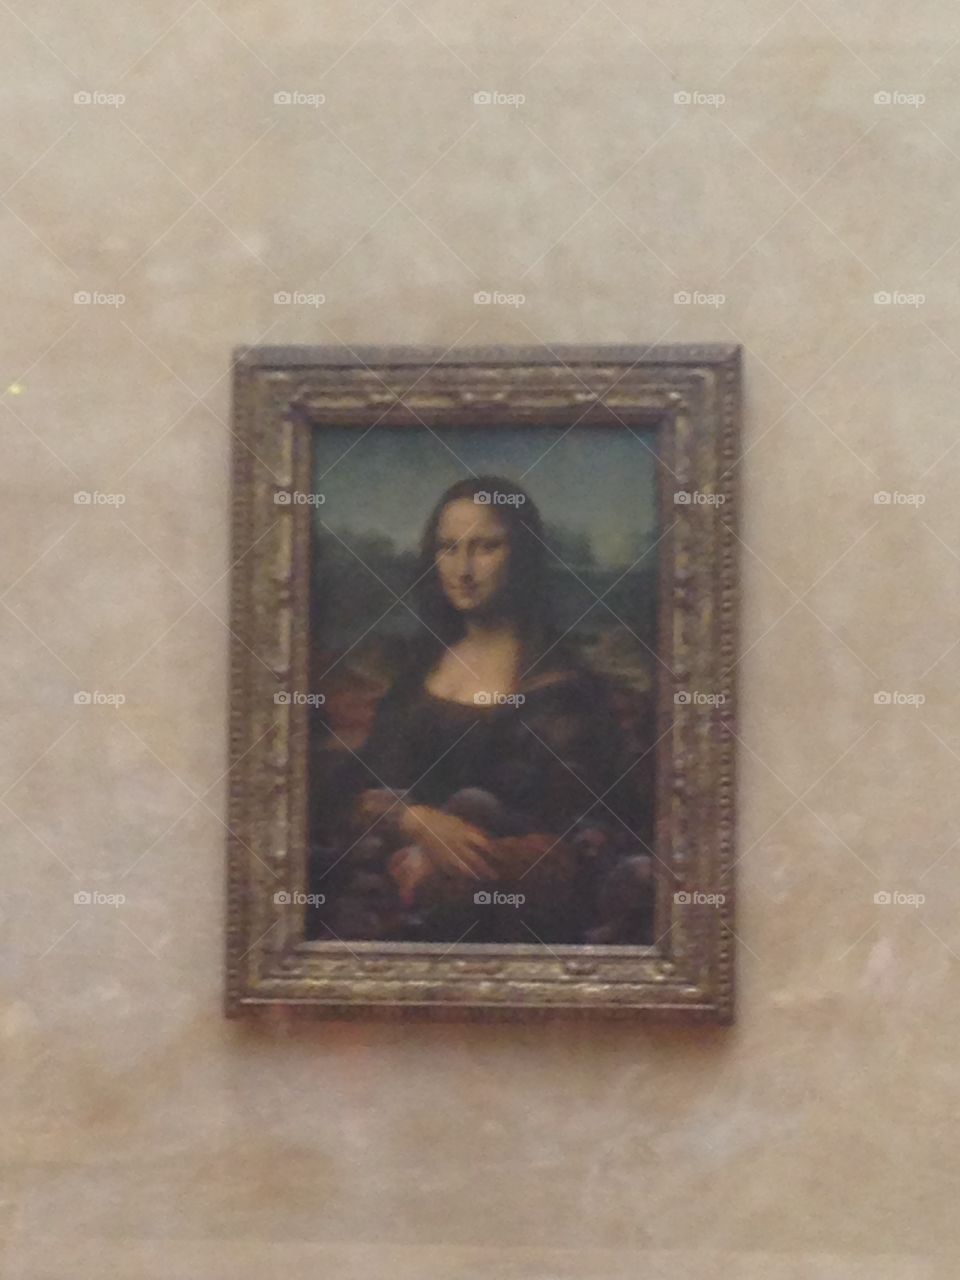 The incredibly famous painting of Mona Lisa by Leonardo di Vinci. You’d be amazed at how many people go to the Louvre in Paris just to take a photo of her painting. 